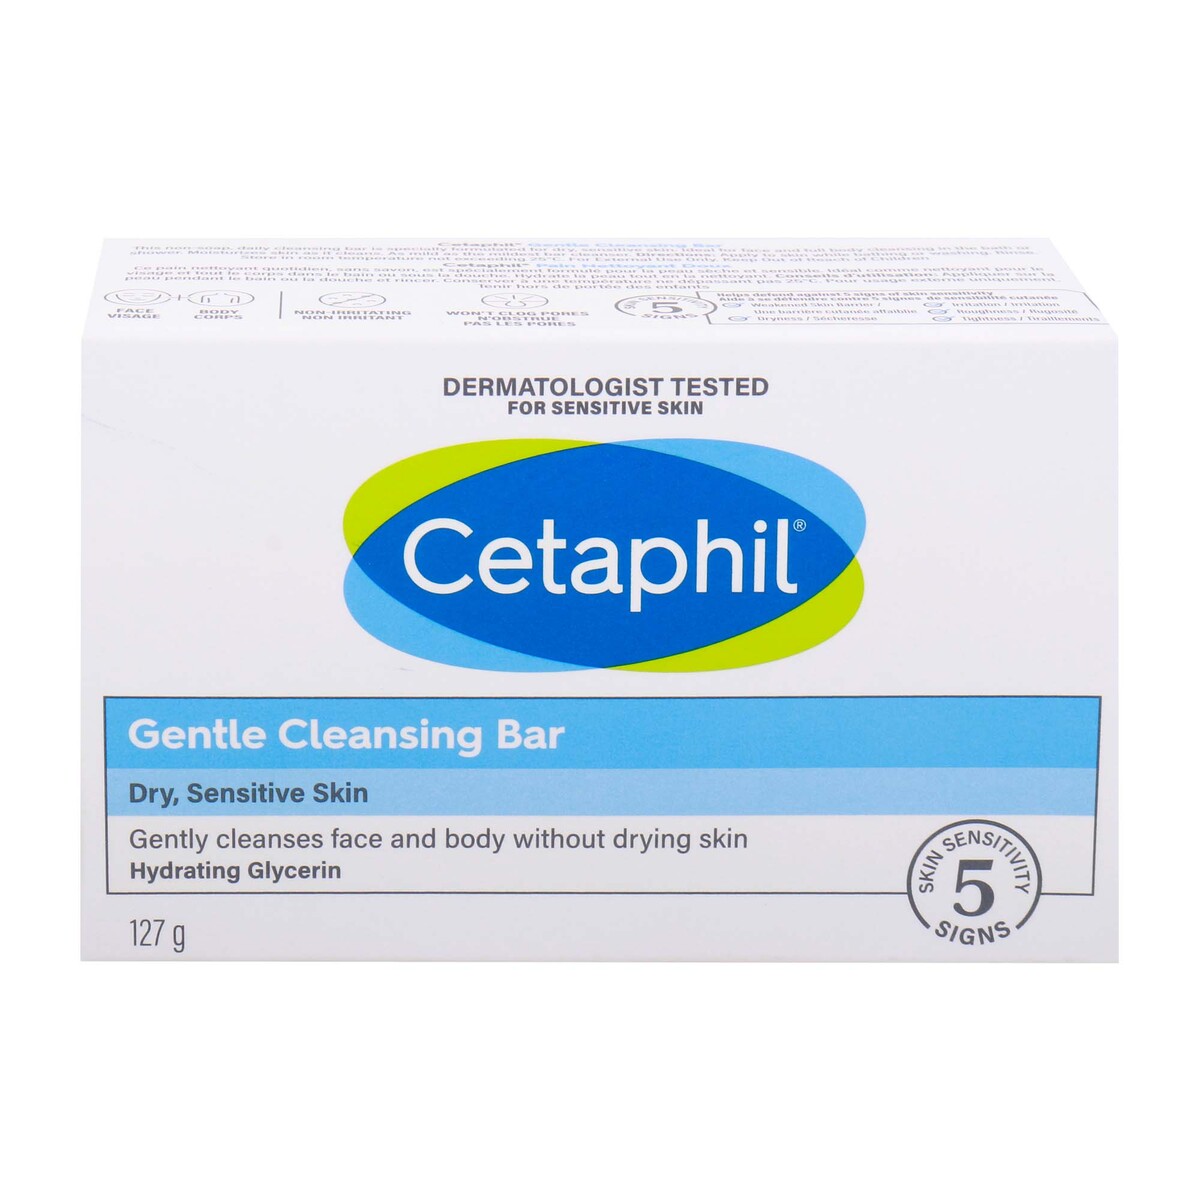 Cetaphil Gentle Cleansing Bar for Dry and Sensitive Skin, 127 g